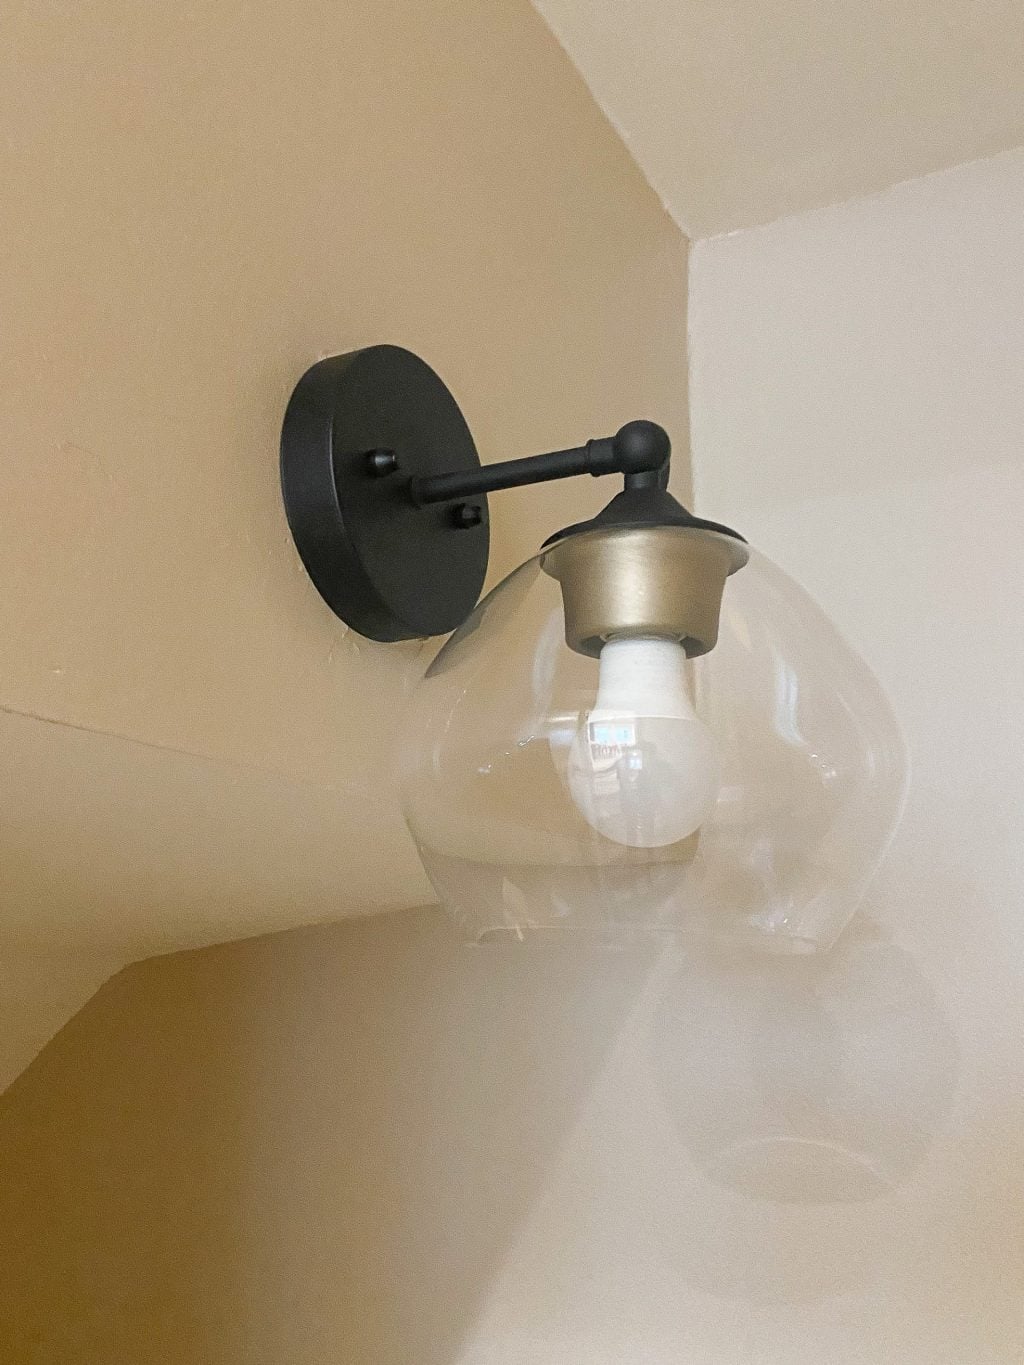 July 2021 - swapping out an old light fixture in our stairwell